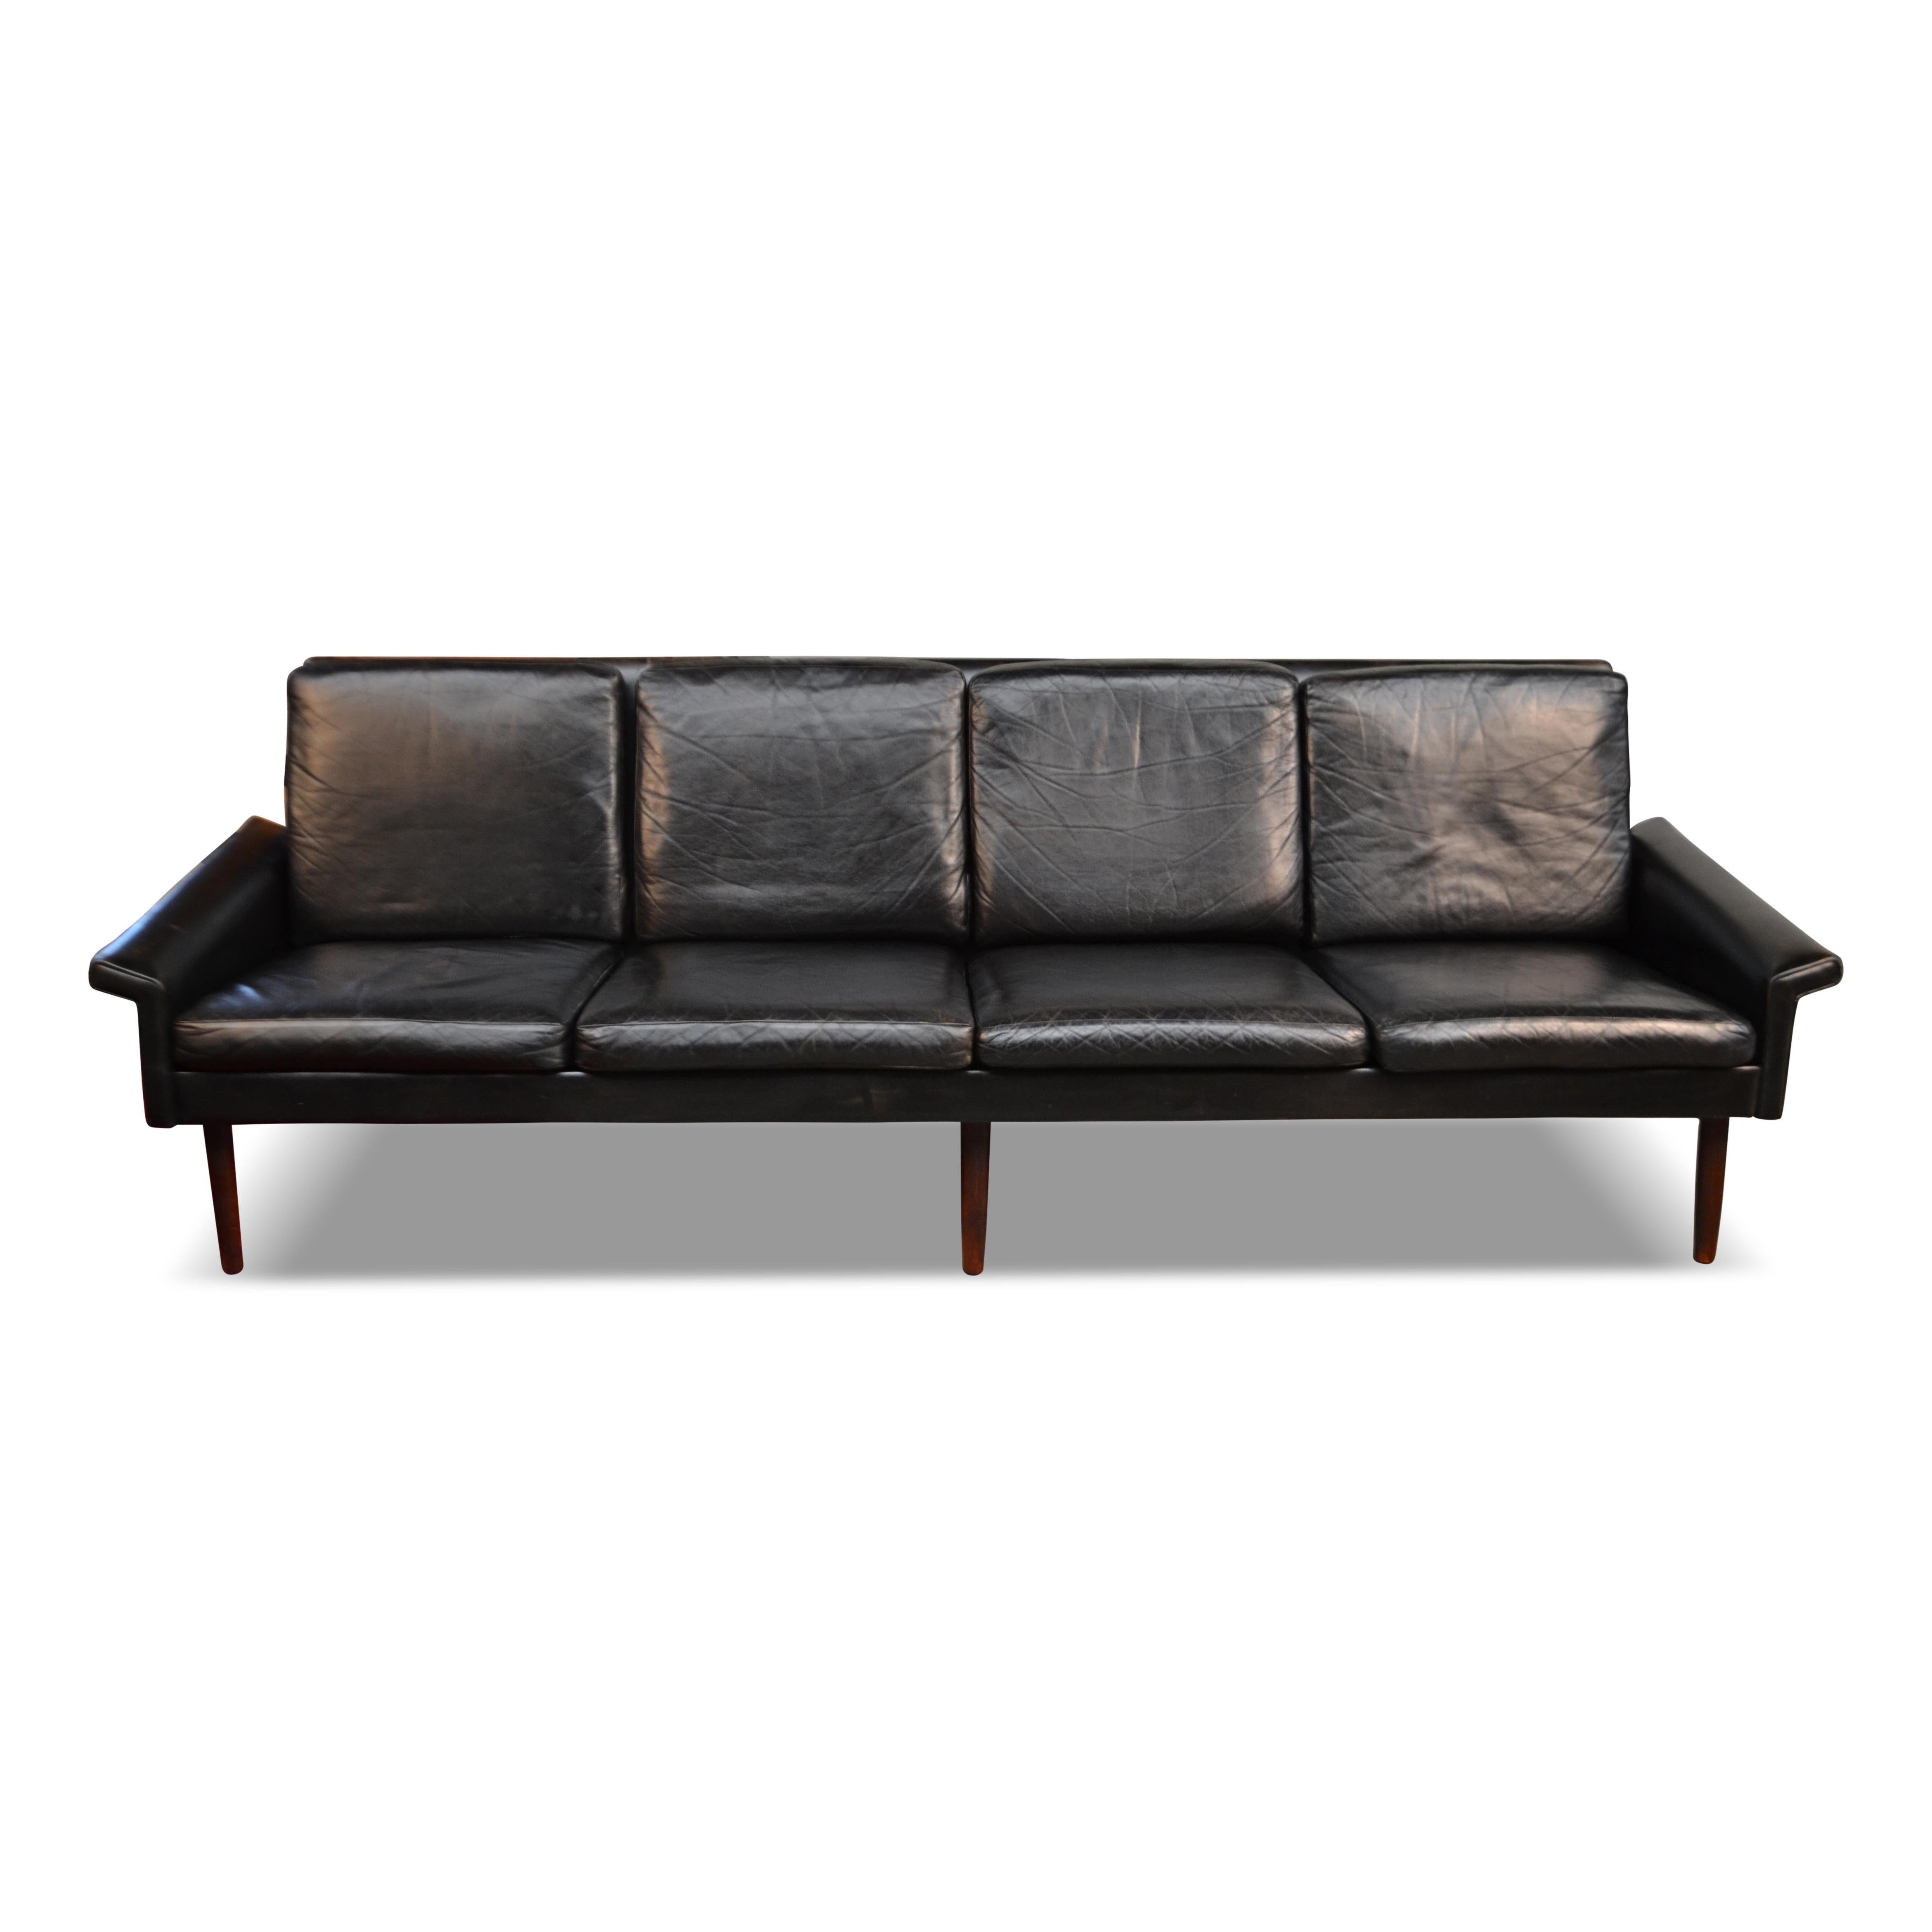 Vintage 4-seater leather sofa designed by Danish designer Hans Olsen for C.S. Møbler, Denmark. This rare model features a stylish wooden frame covered with eight leather upholstered cushions. Add instant wow to your vintage or modern interior with